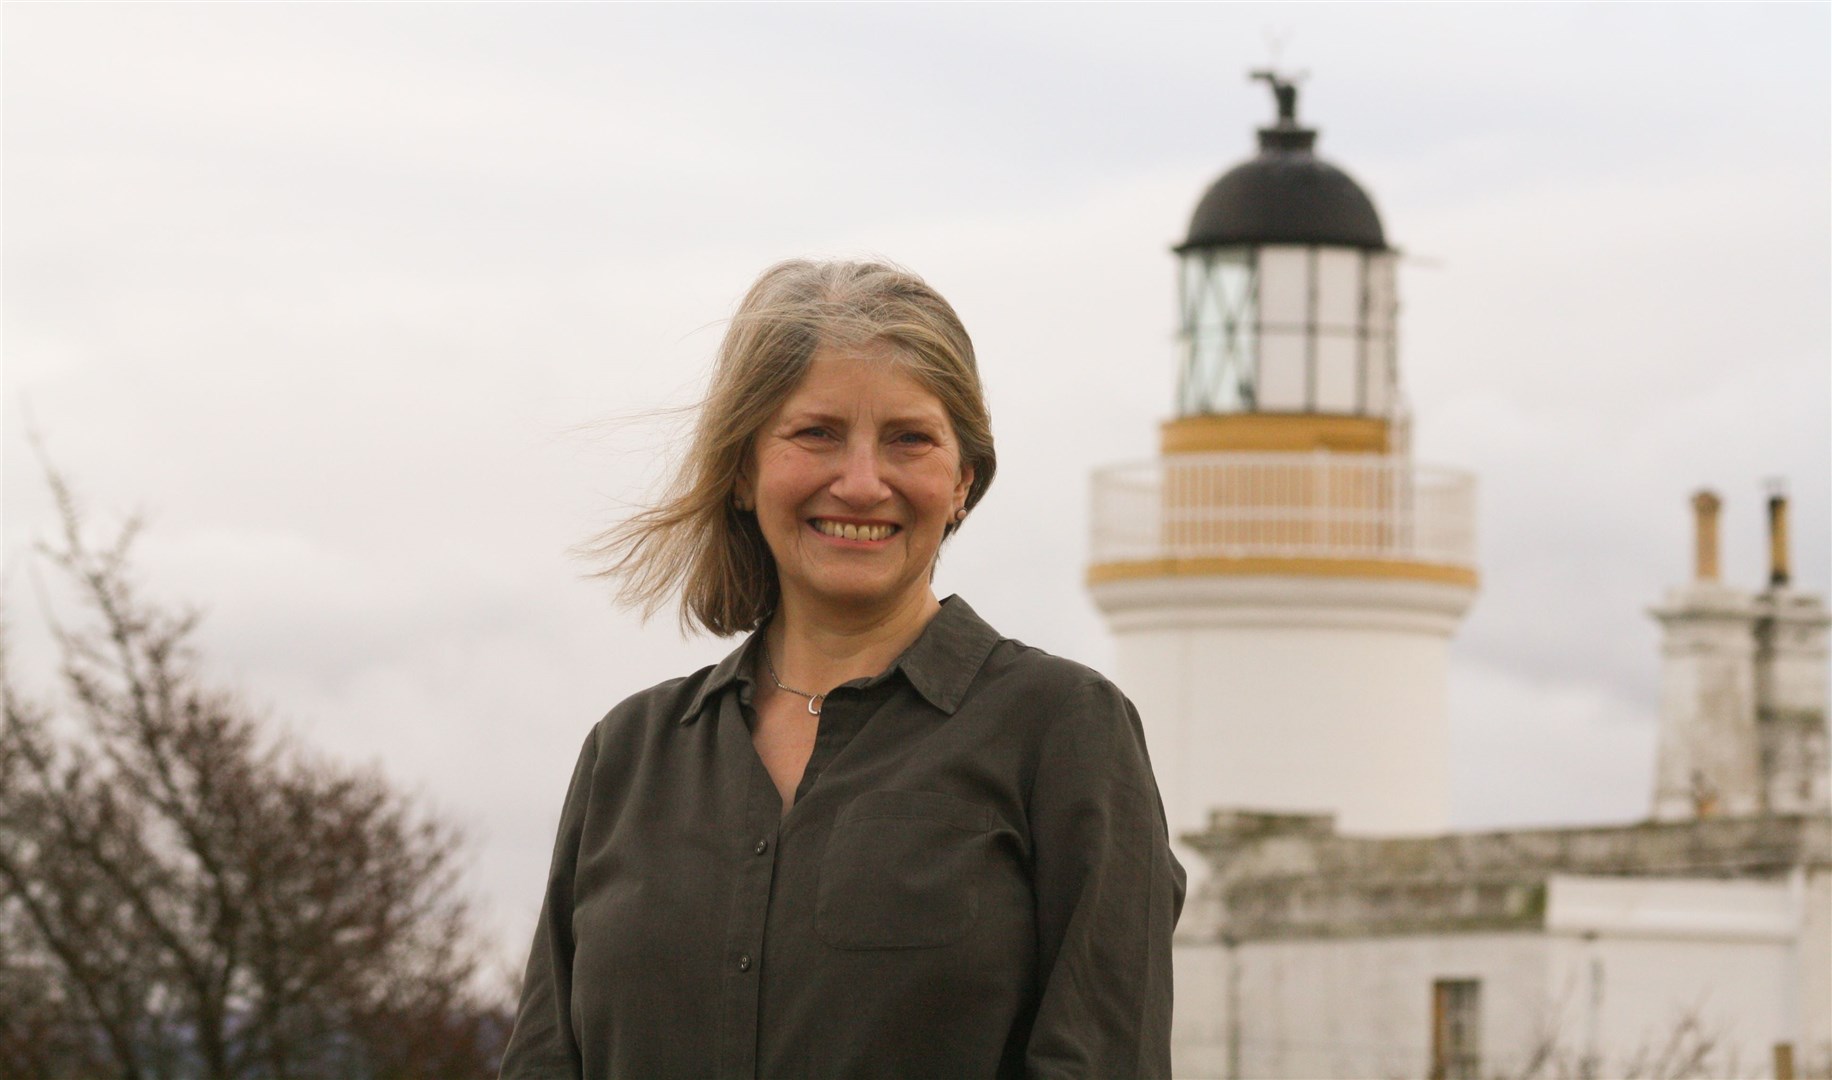 Sarah Atkin has declared herself as a candidate on the Black Isle.